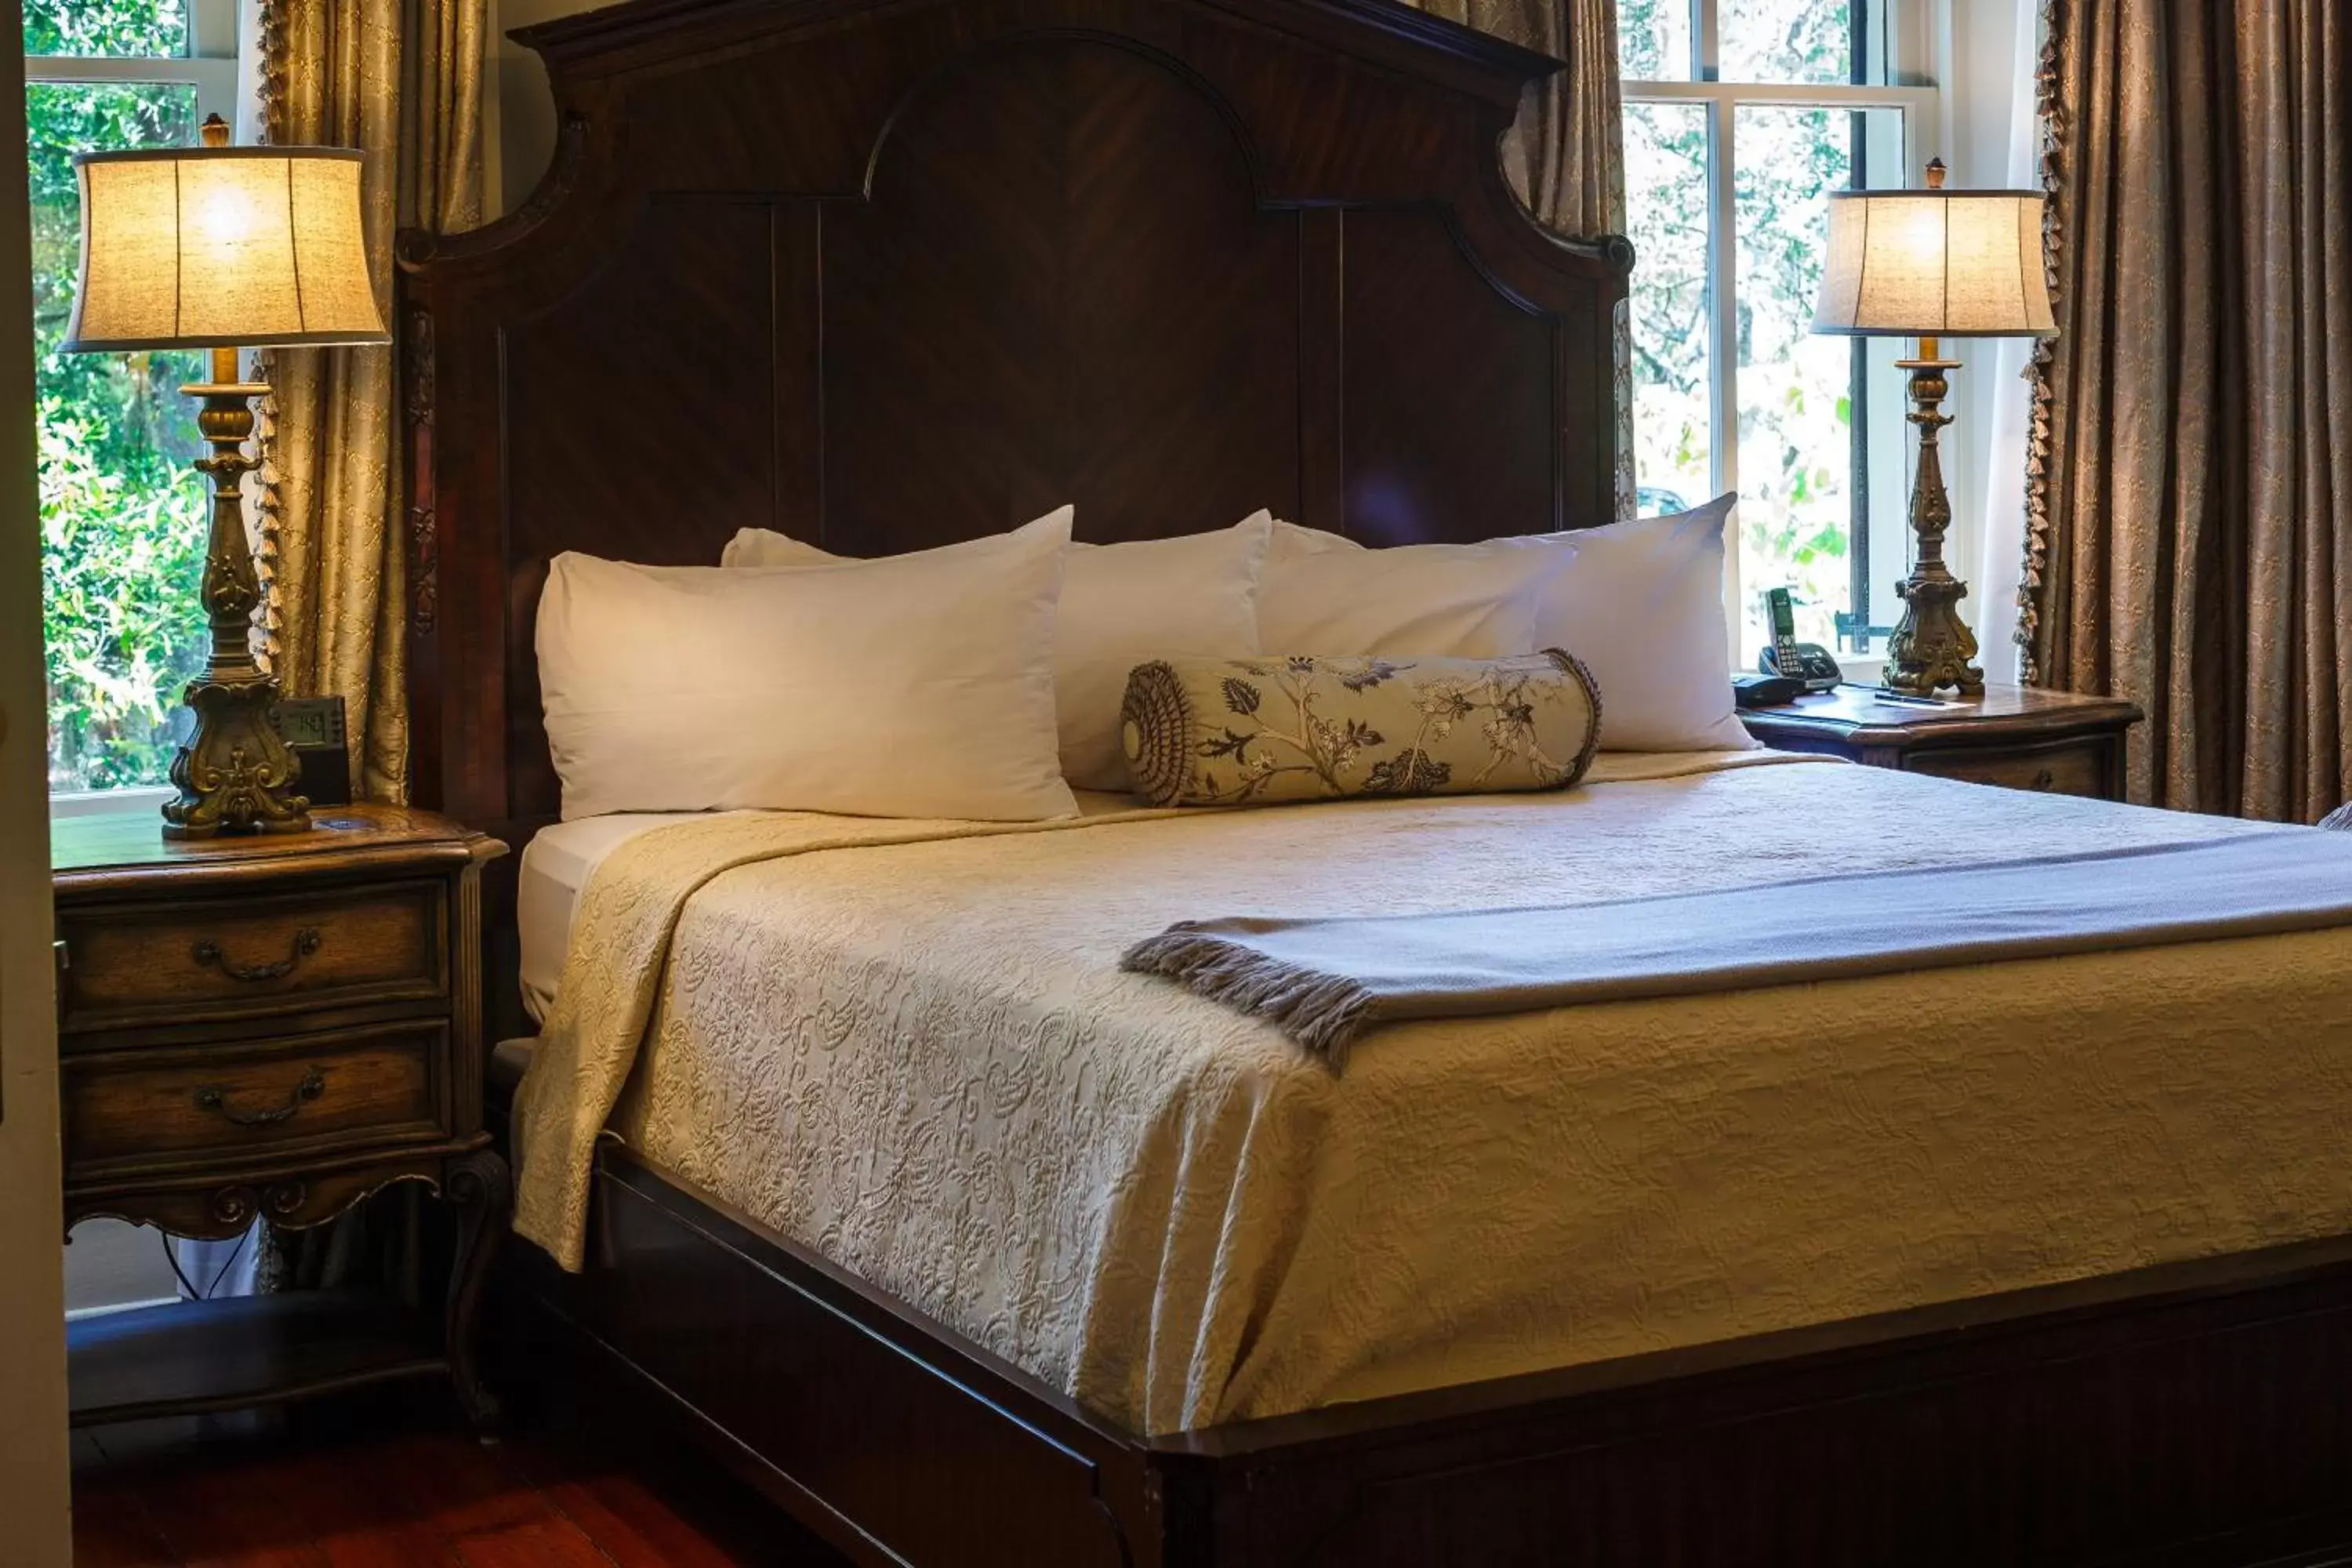 Bed, Room Photo in Eliza Thompson House, Historic Inns of Savannah Collection